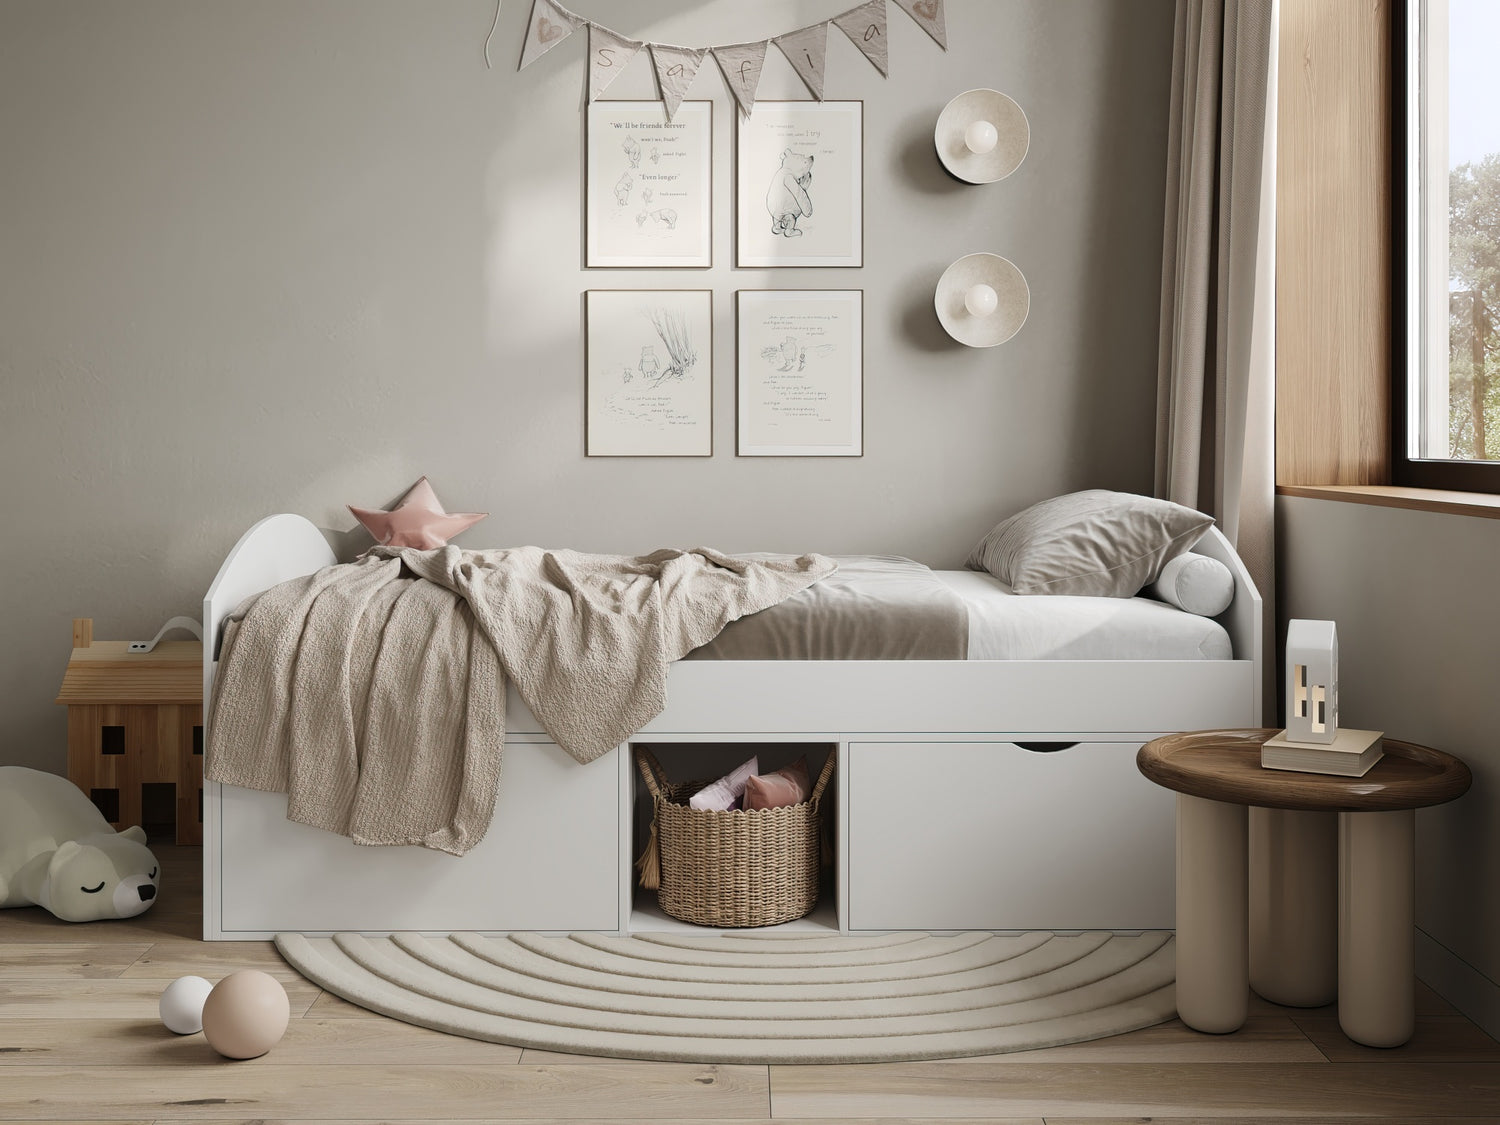 Richmond Kids Storage Bed with Deep Drawers (also available in grey)